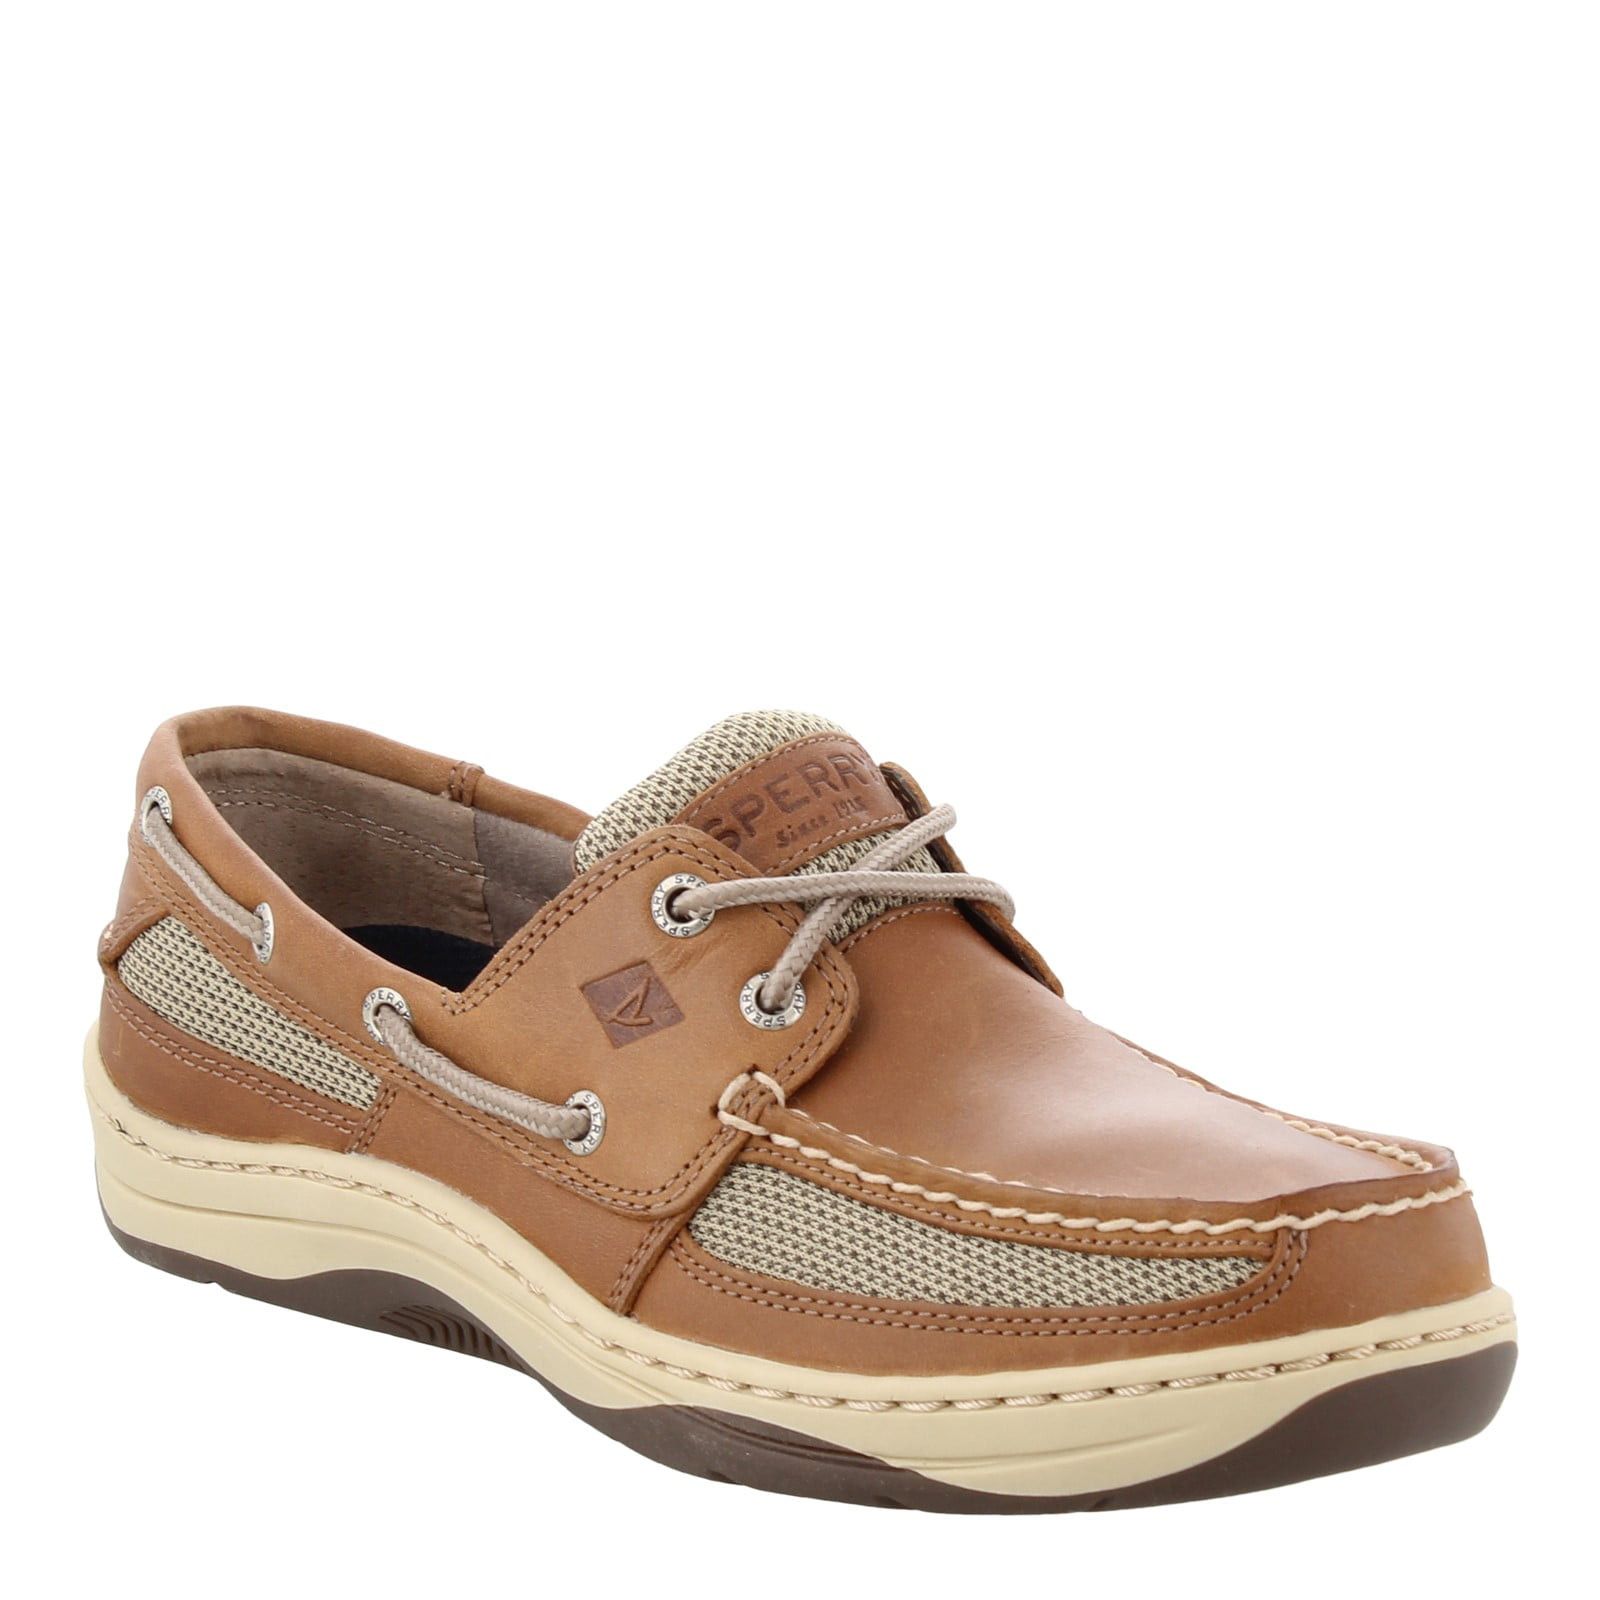 New Sperry A/O 2 Eye Tan Mens Shoes Casual Shoes Flat